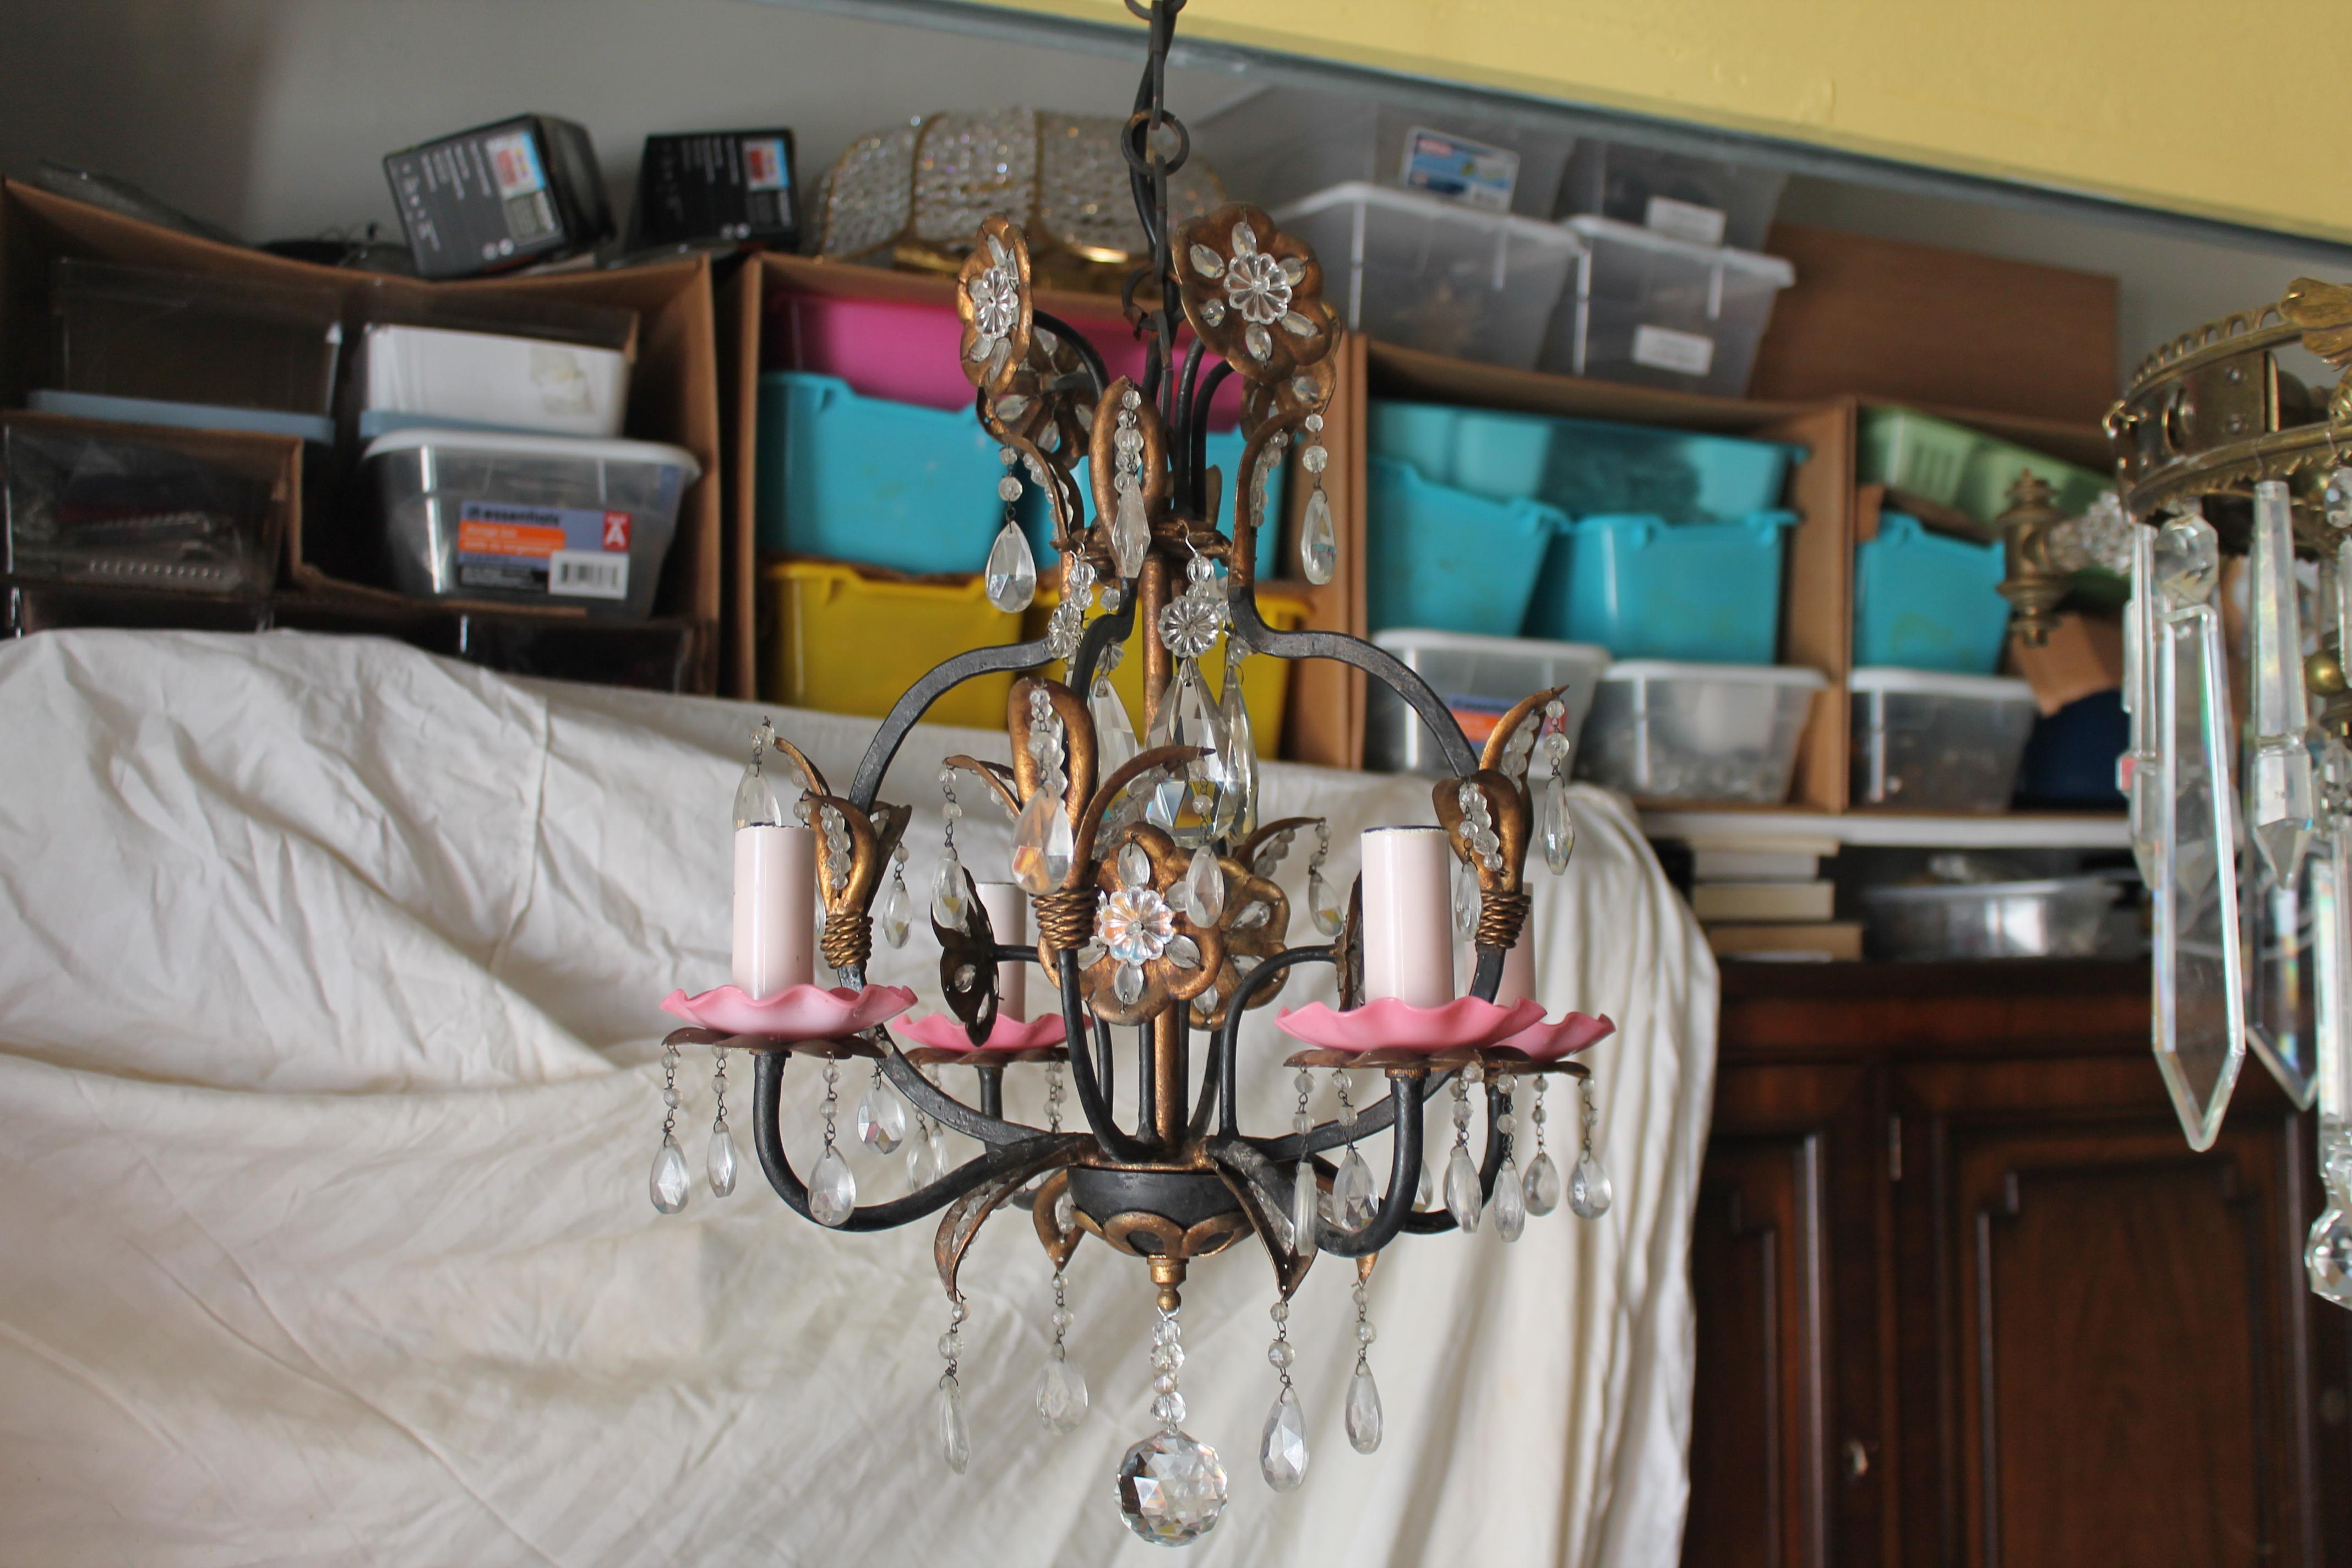 c1900 Petite French Art Nouveau Cut Crystal Floral Form Chandelier Shabby & Chic In Good Condition For Sale In Opa Locka, FL